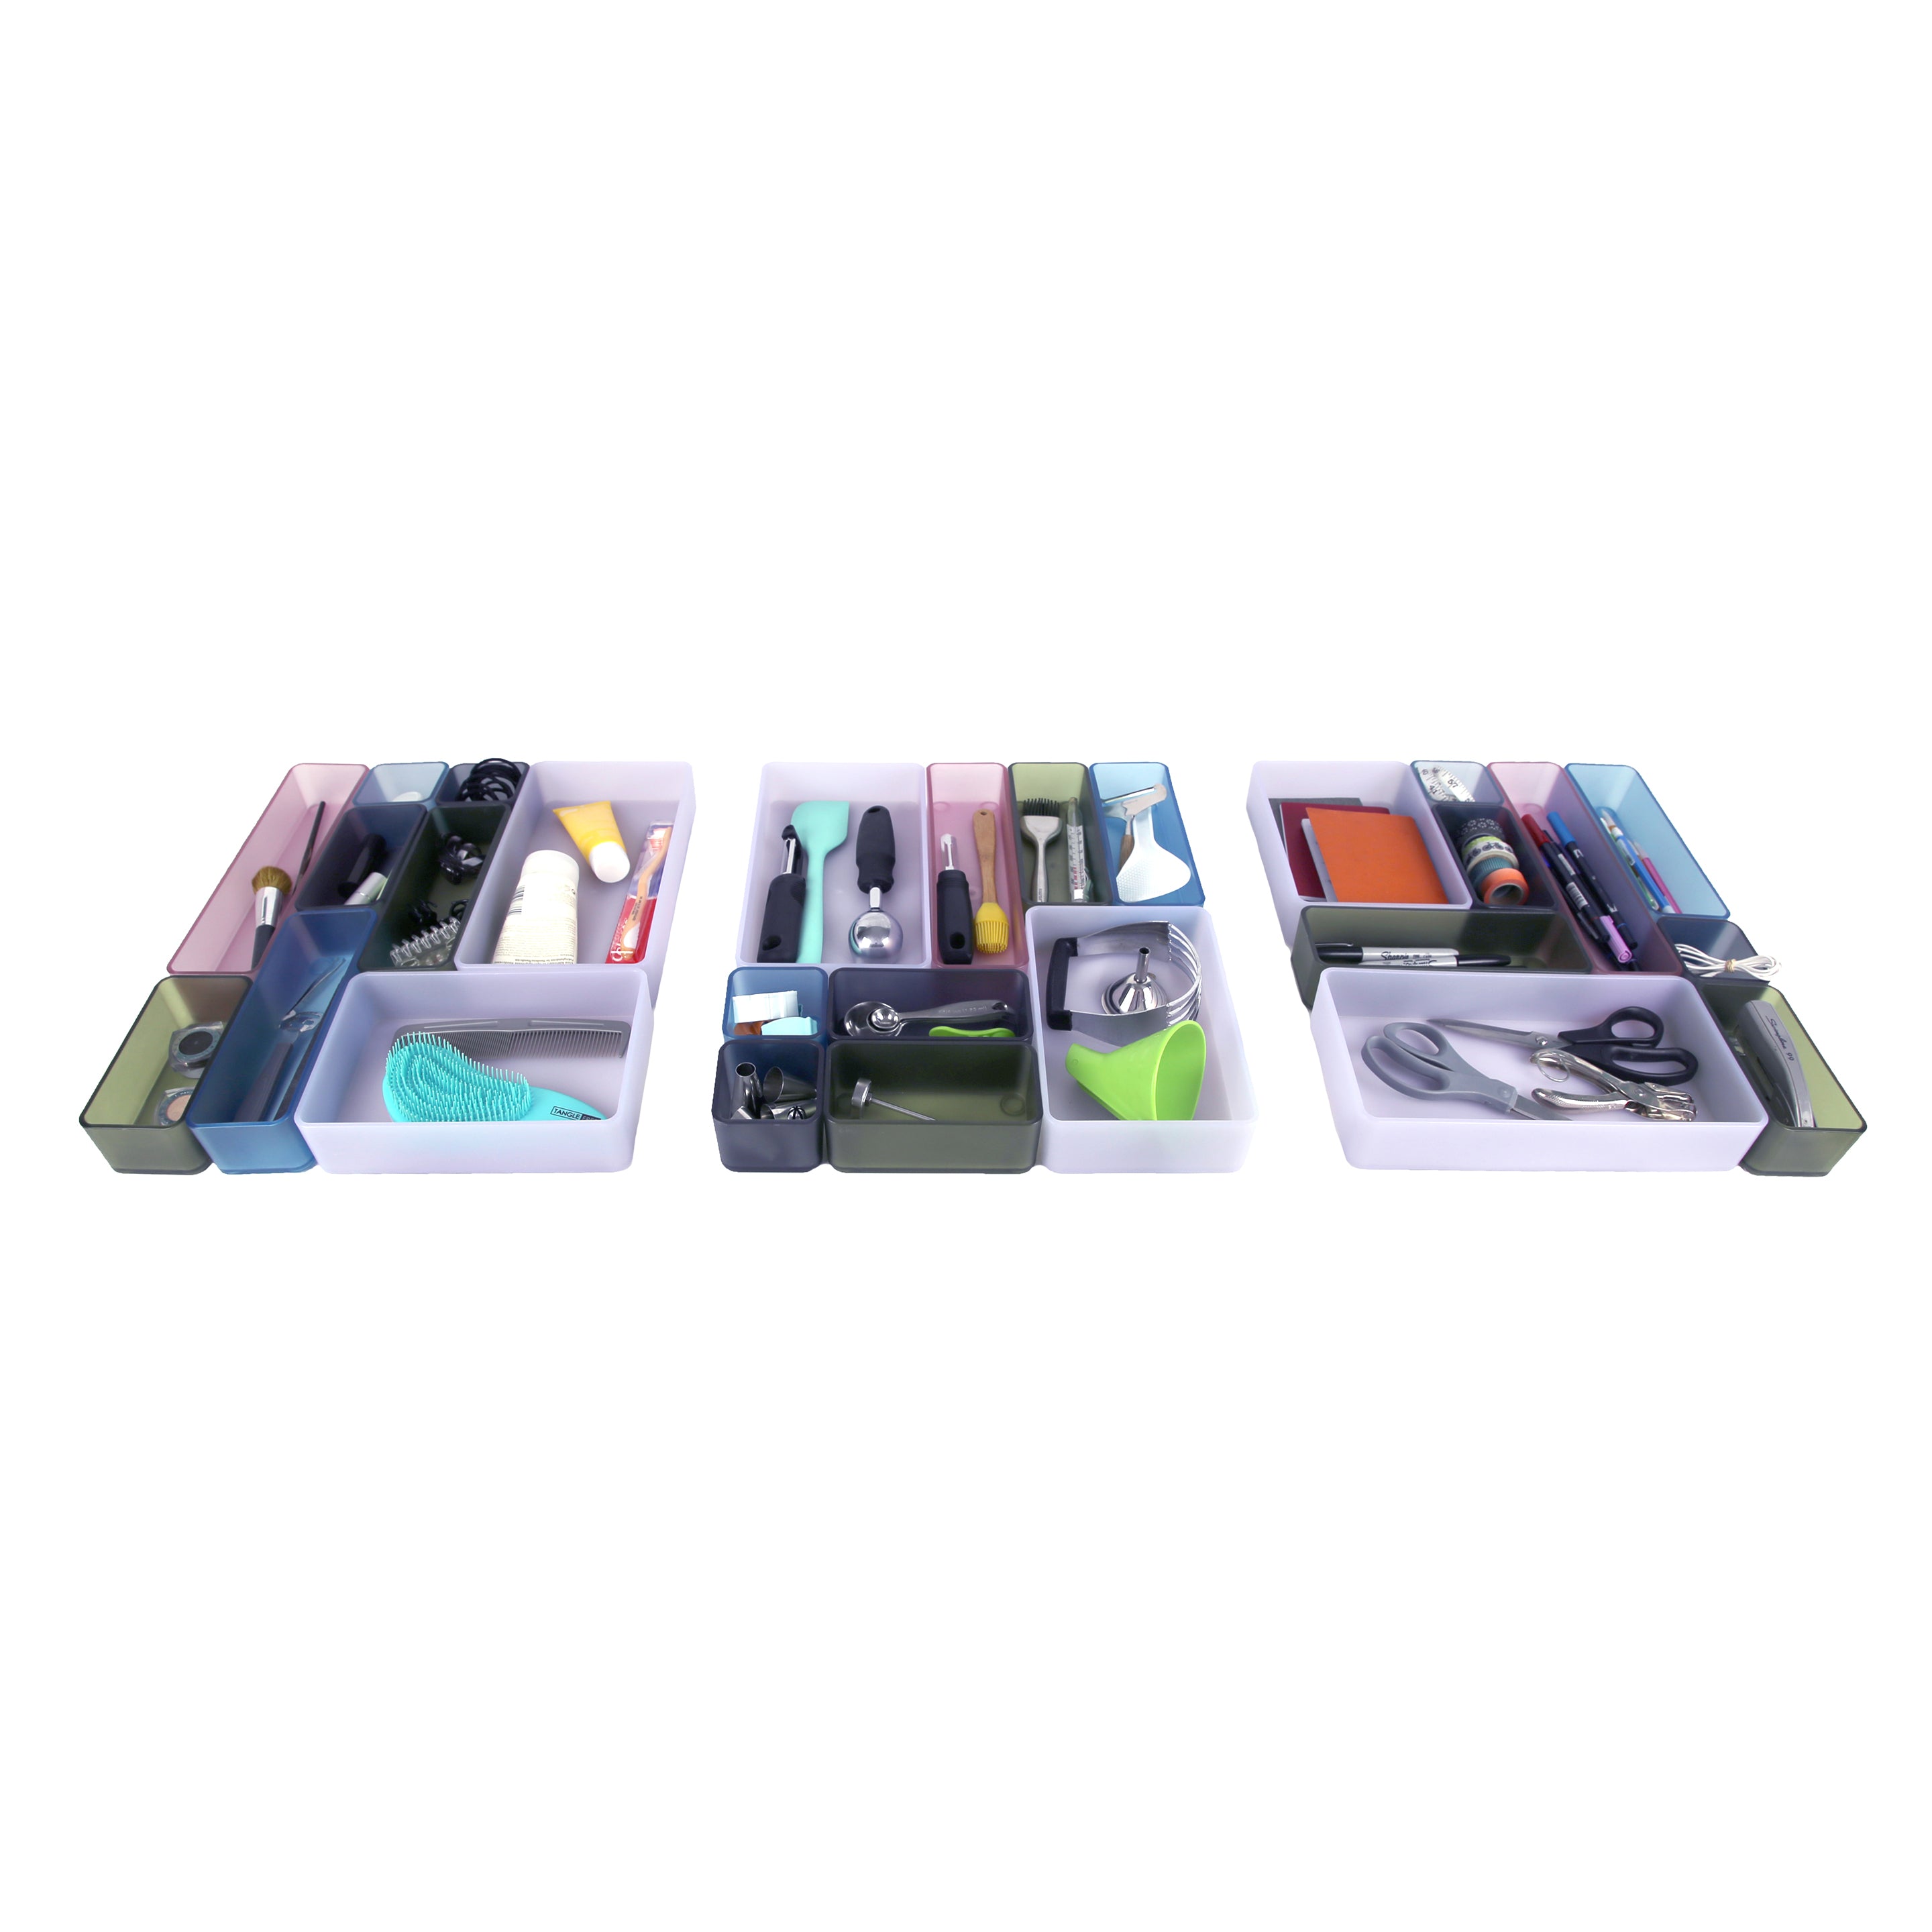 reSTAK recycled stackable organizing bins set of 9